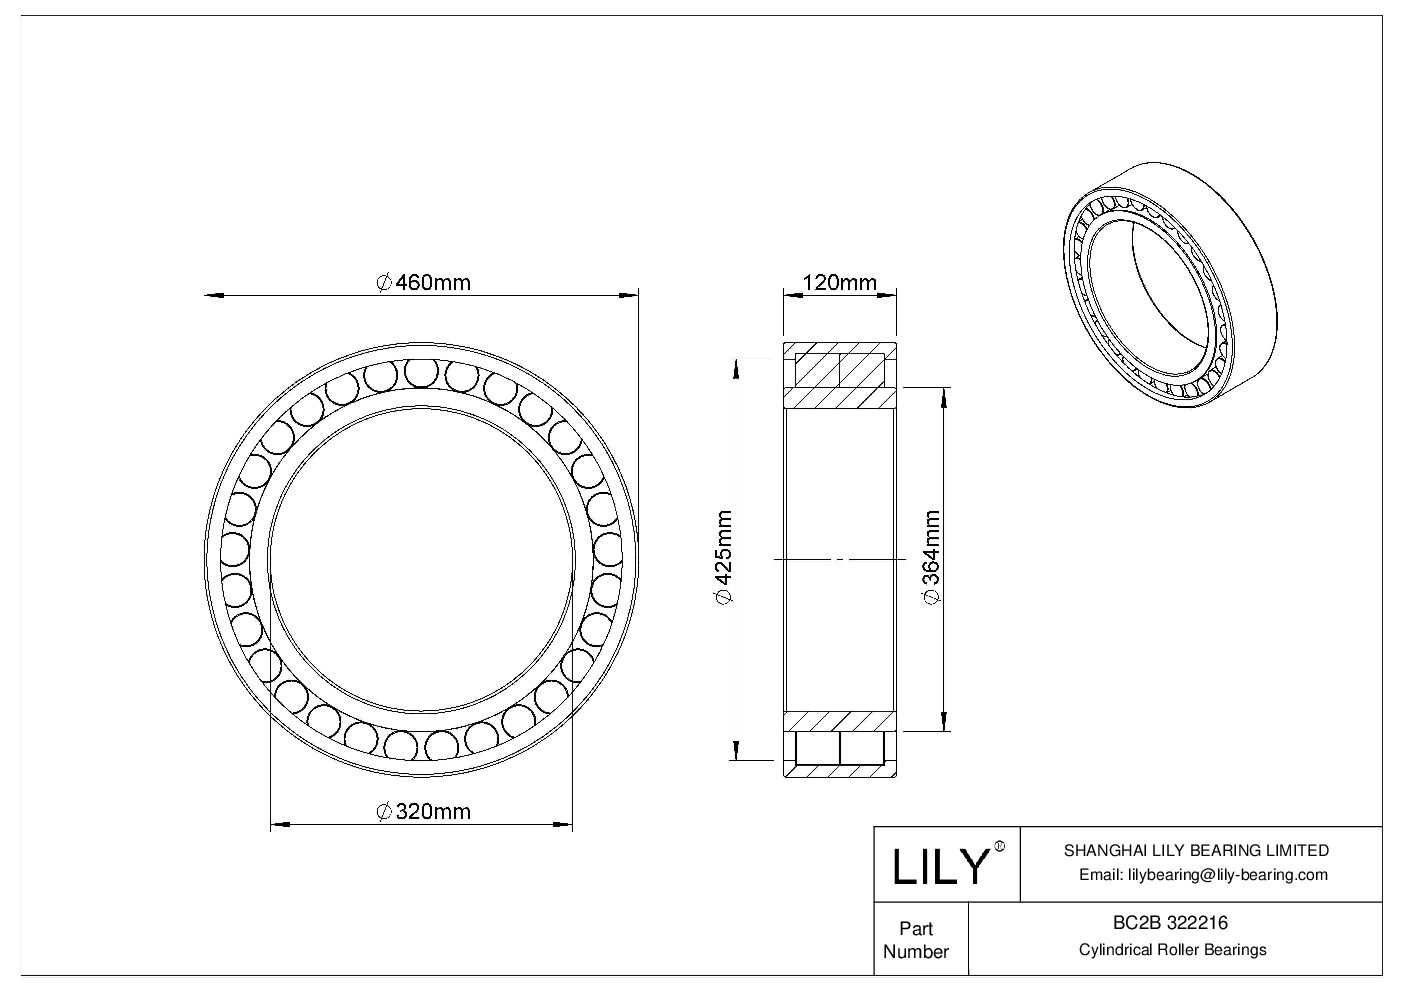 BC2B 322216 Double Row Cylindrical Roller Bearings cad drawing